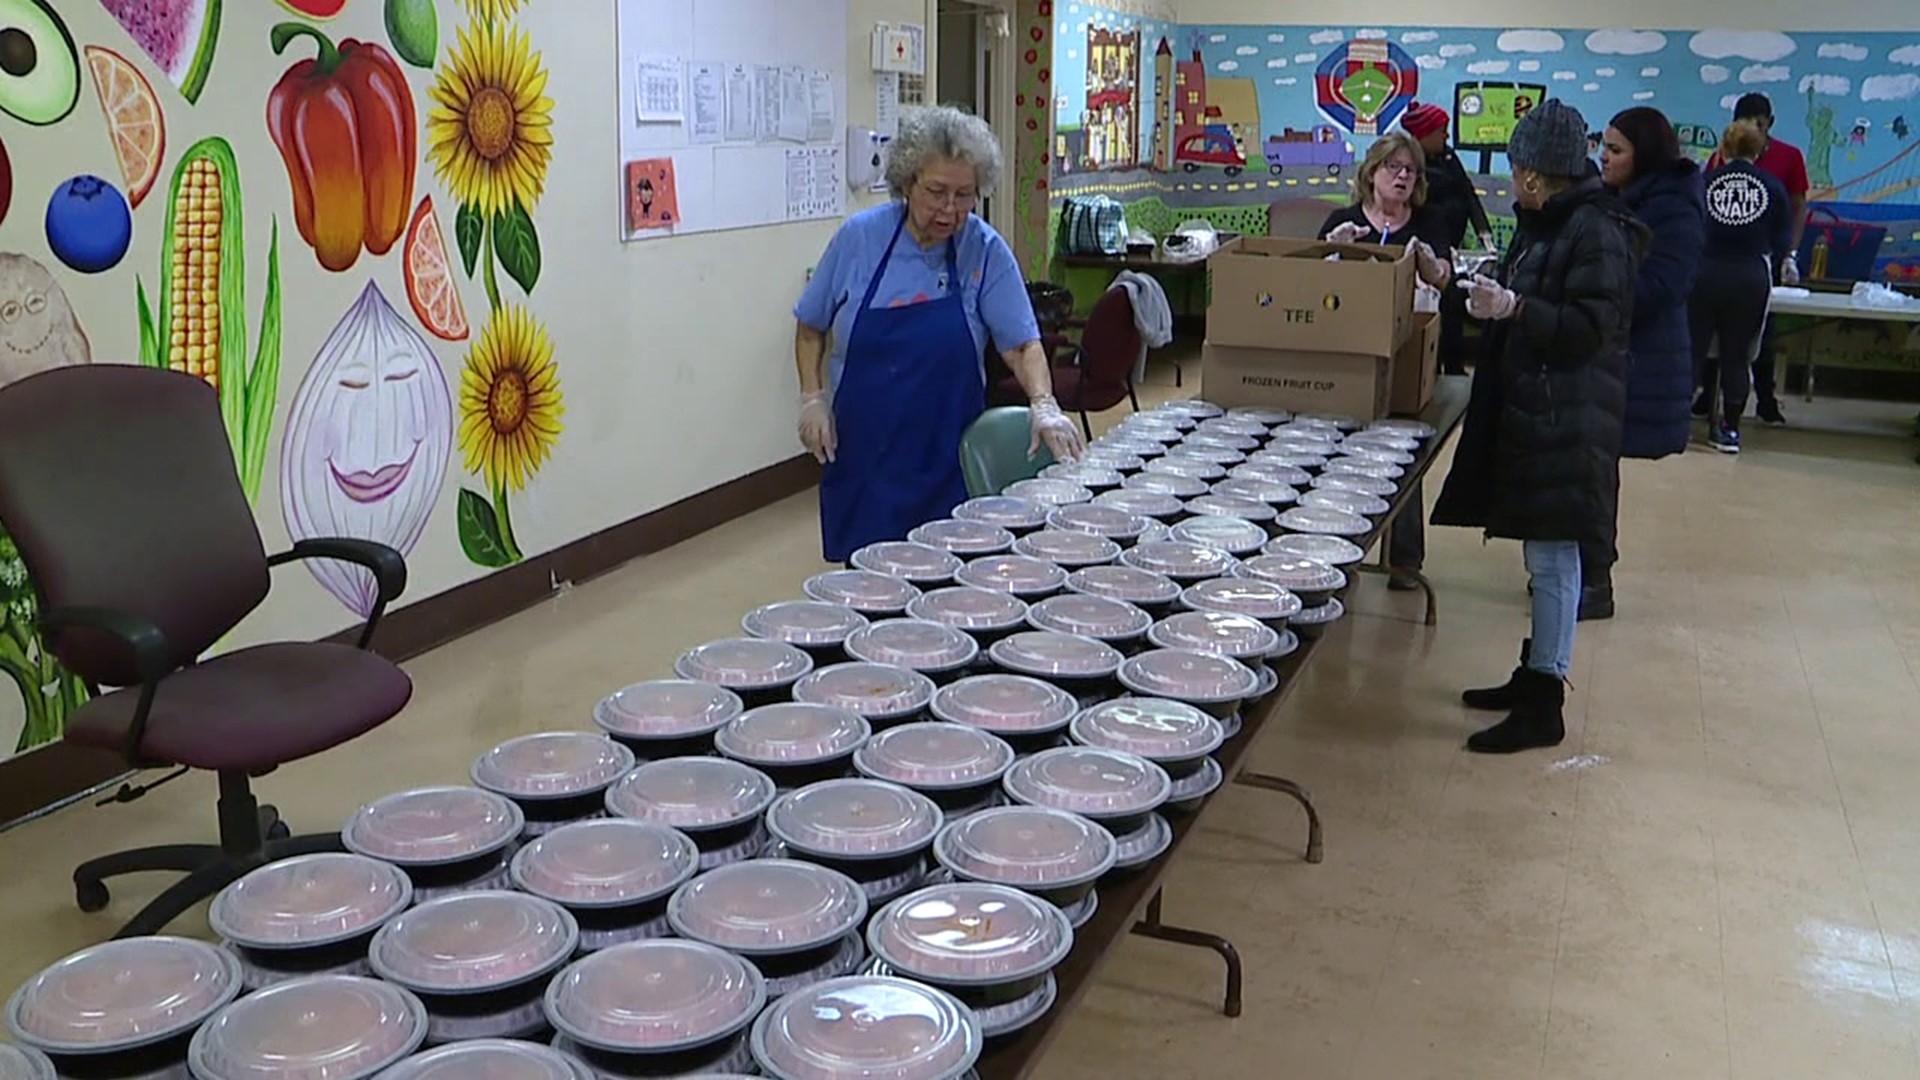 A group in Hazleton is trying to bridge the hunger gap for kids in the region who may not otherwise have enough to eat.